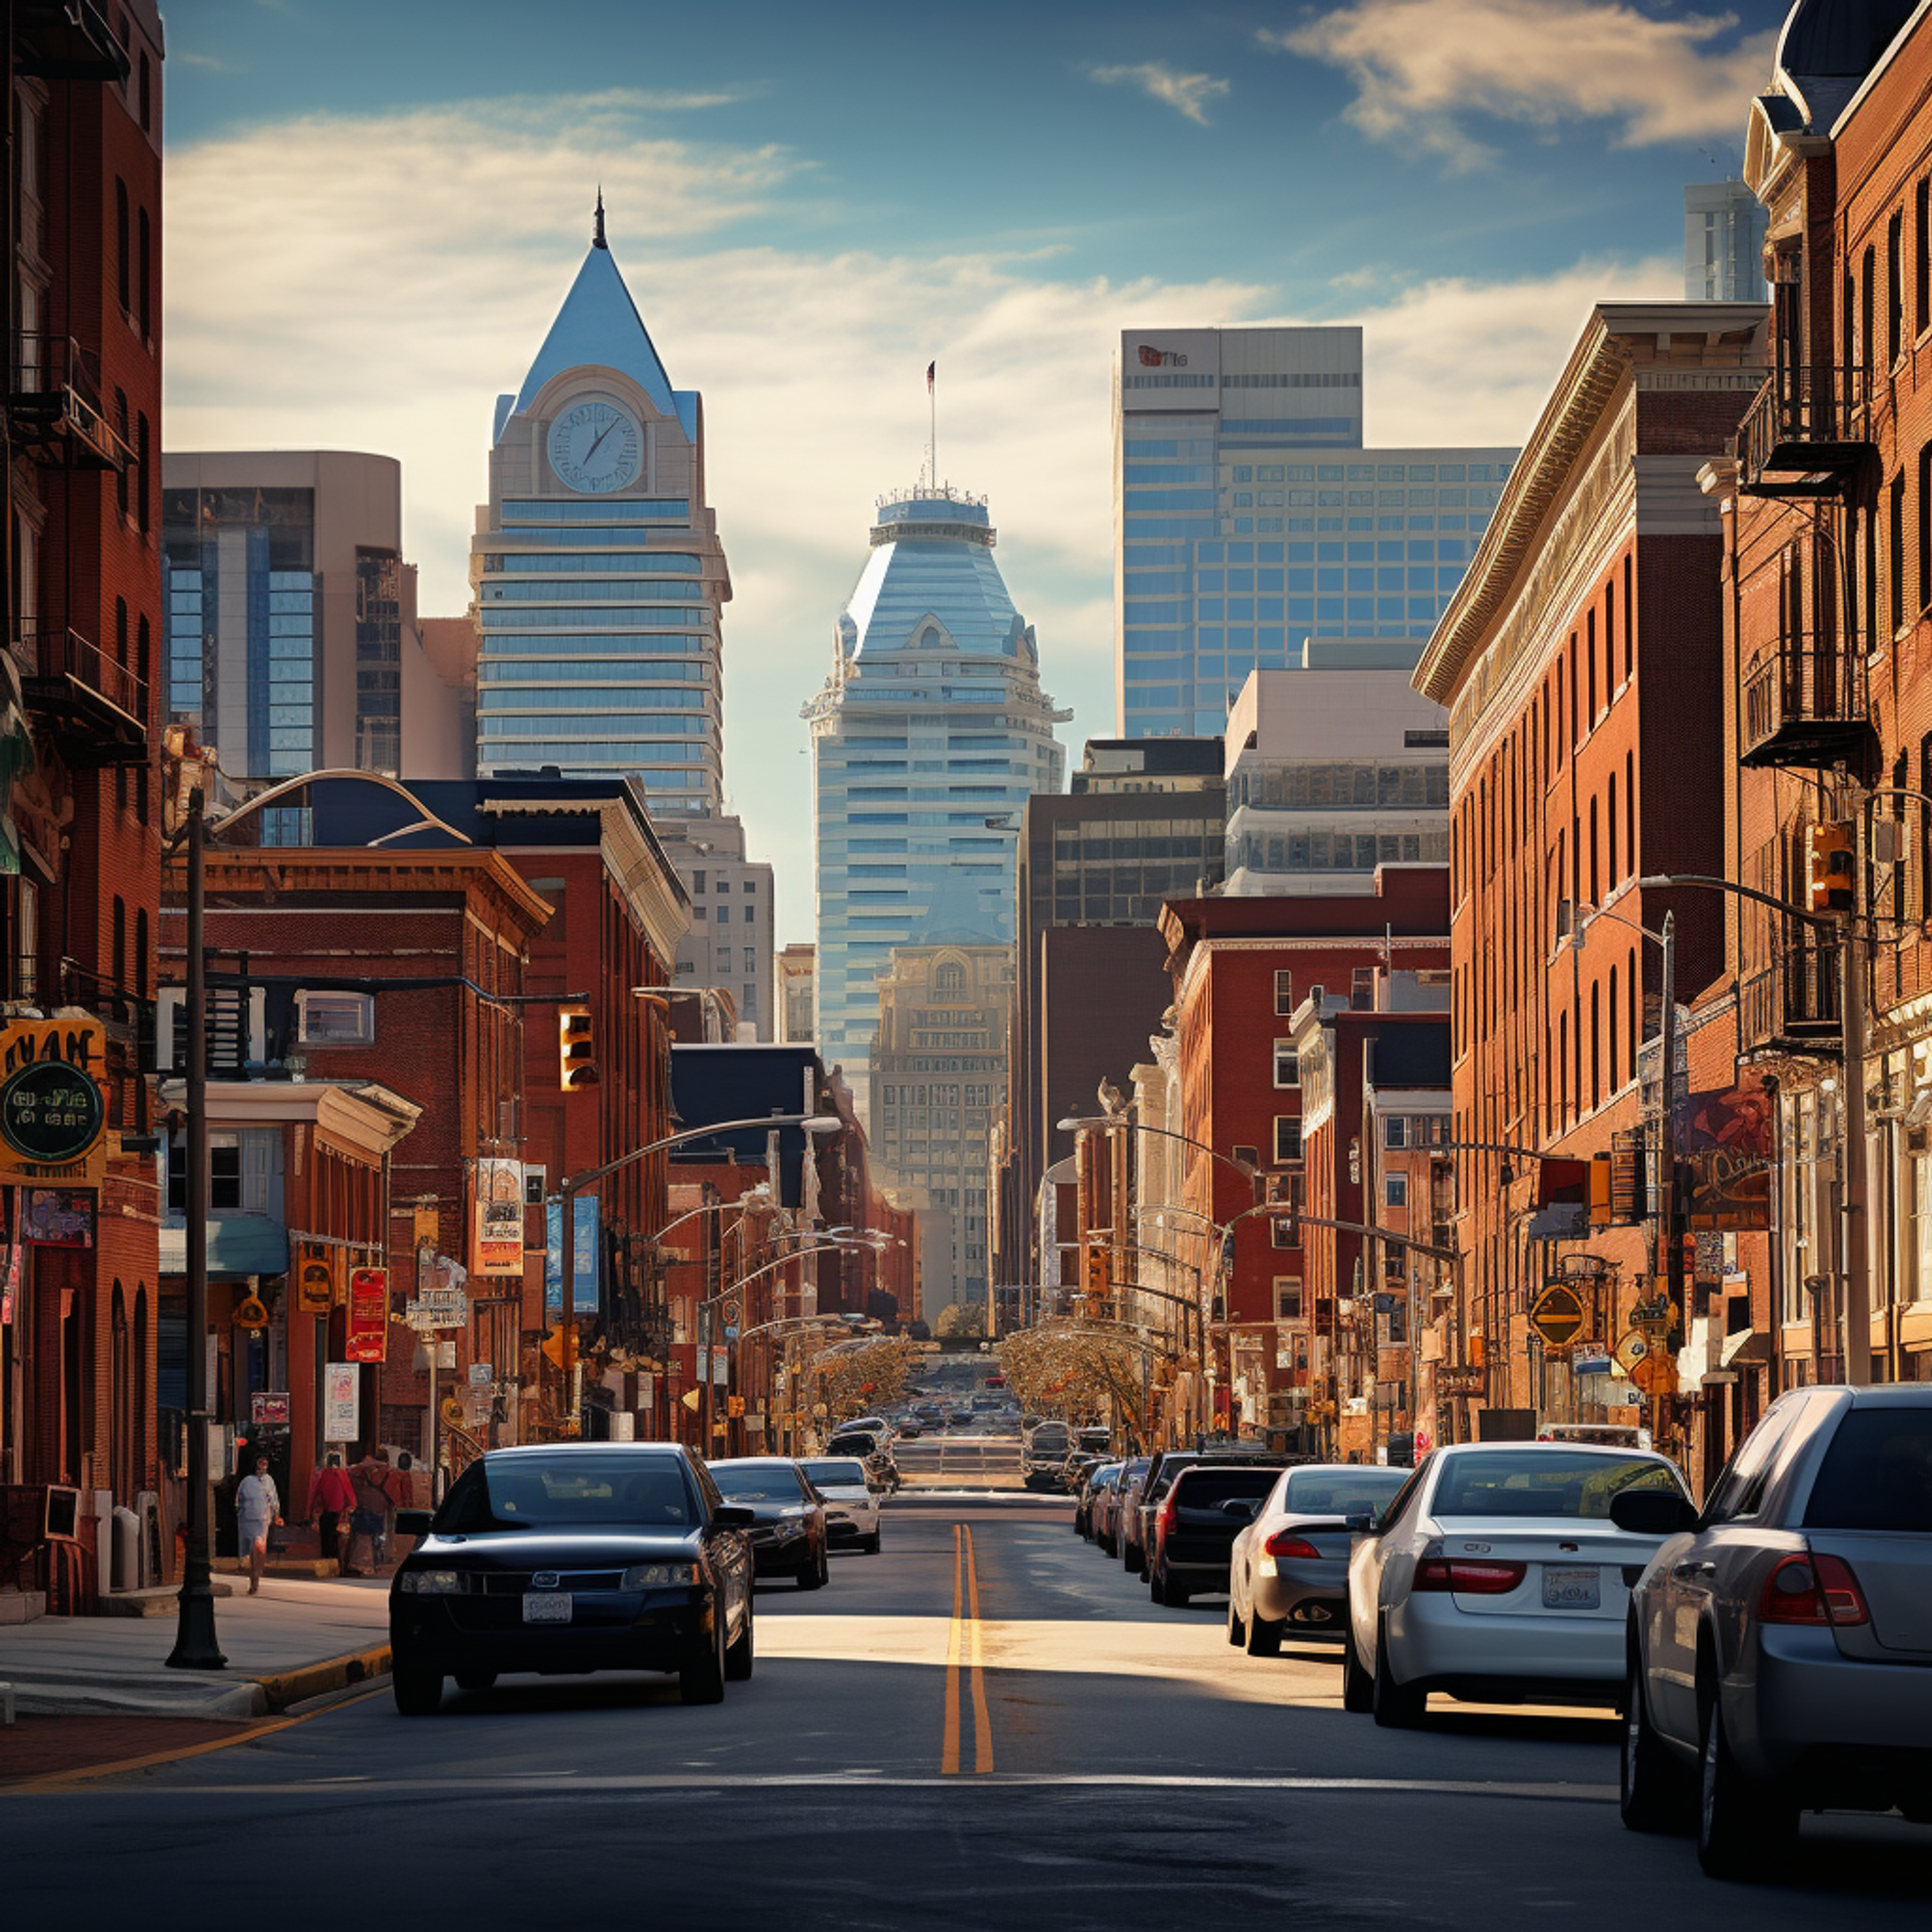 View of a bustling street in Baltimore, with a line of parked cars on either side, and historic red brick buildings leading up to modern skyscrapers in the distance under a clear blue sky.